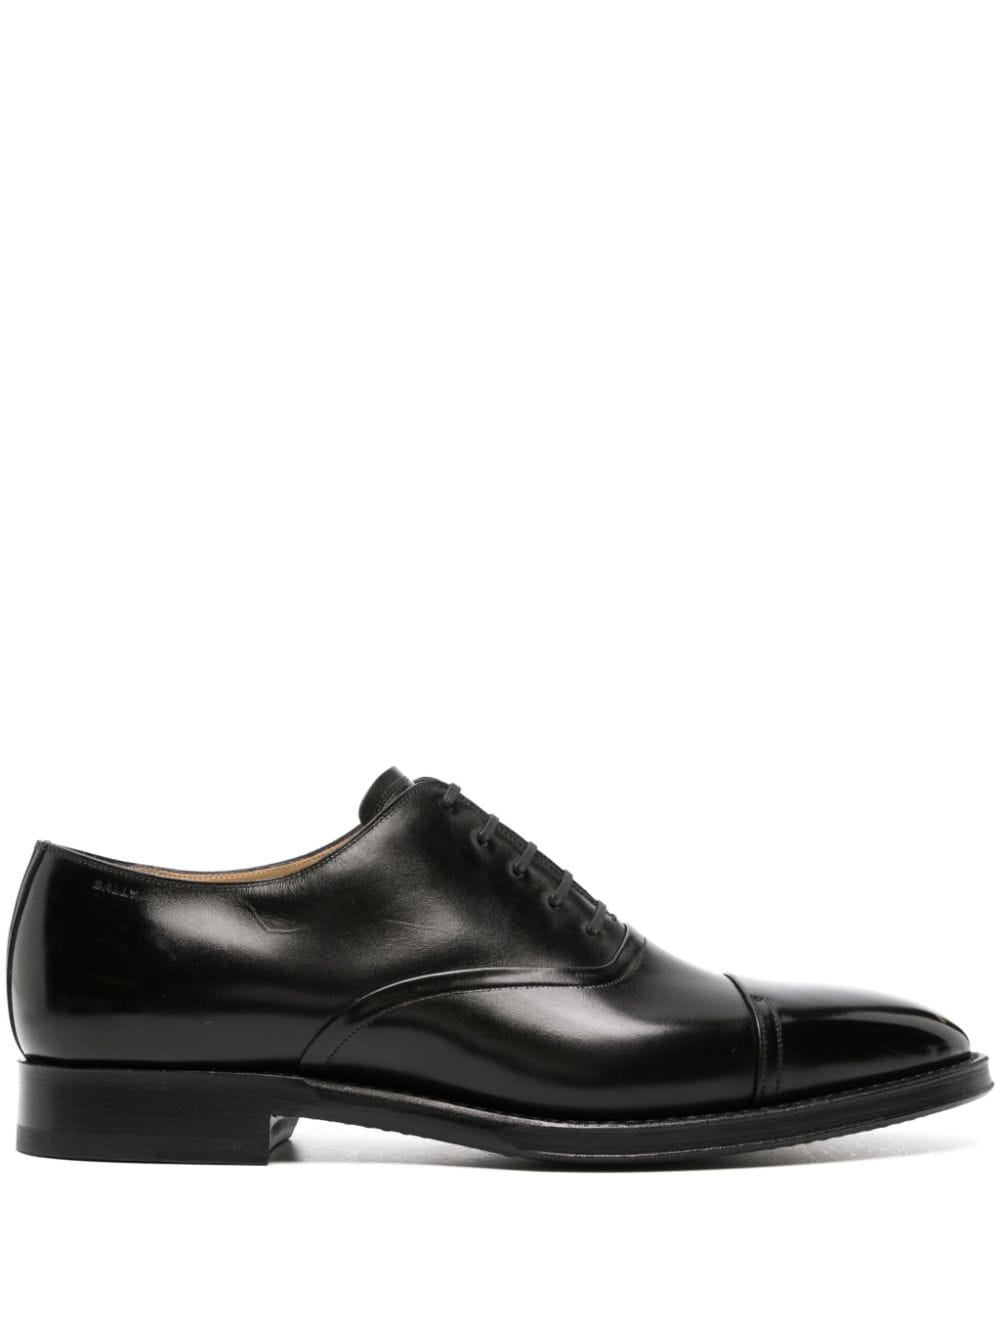 Bally Selby Leather Oxford Shoes In Black